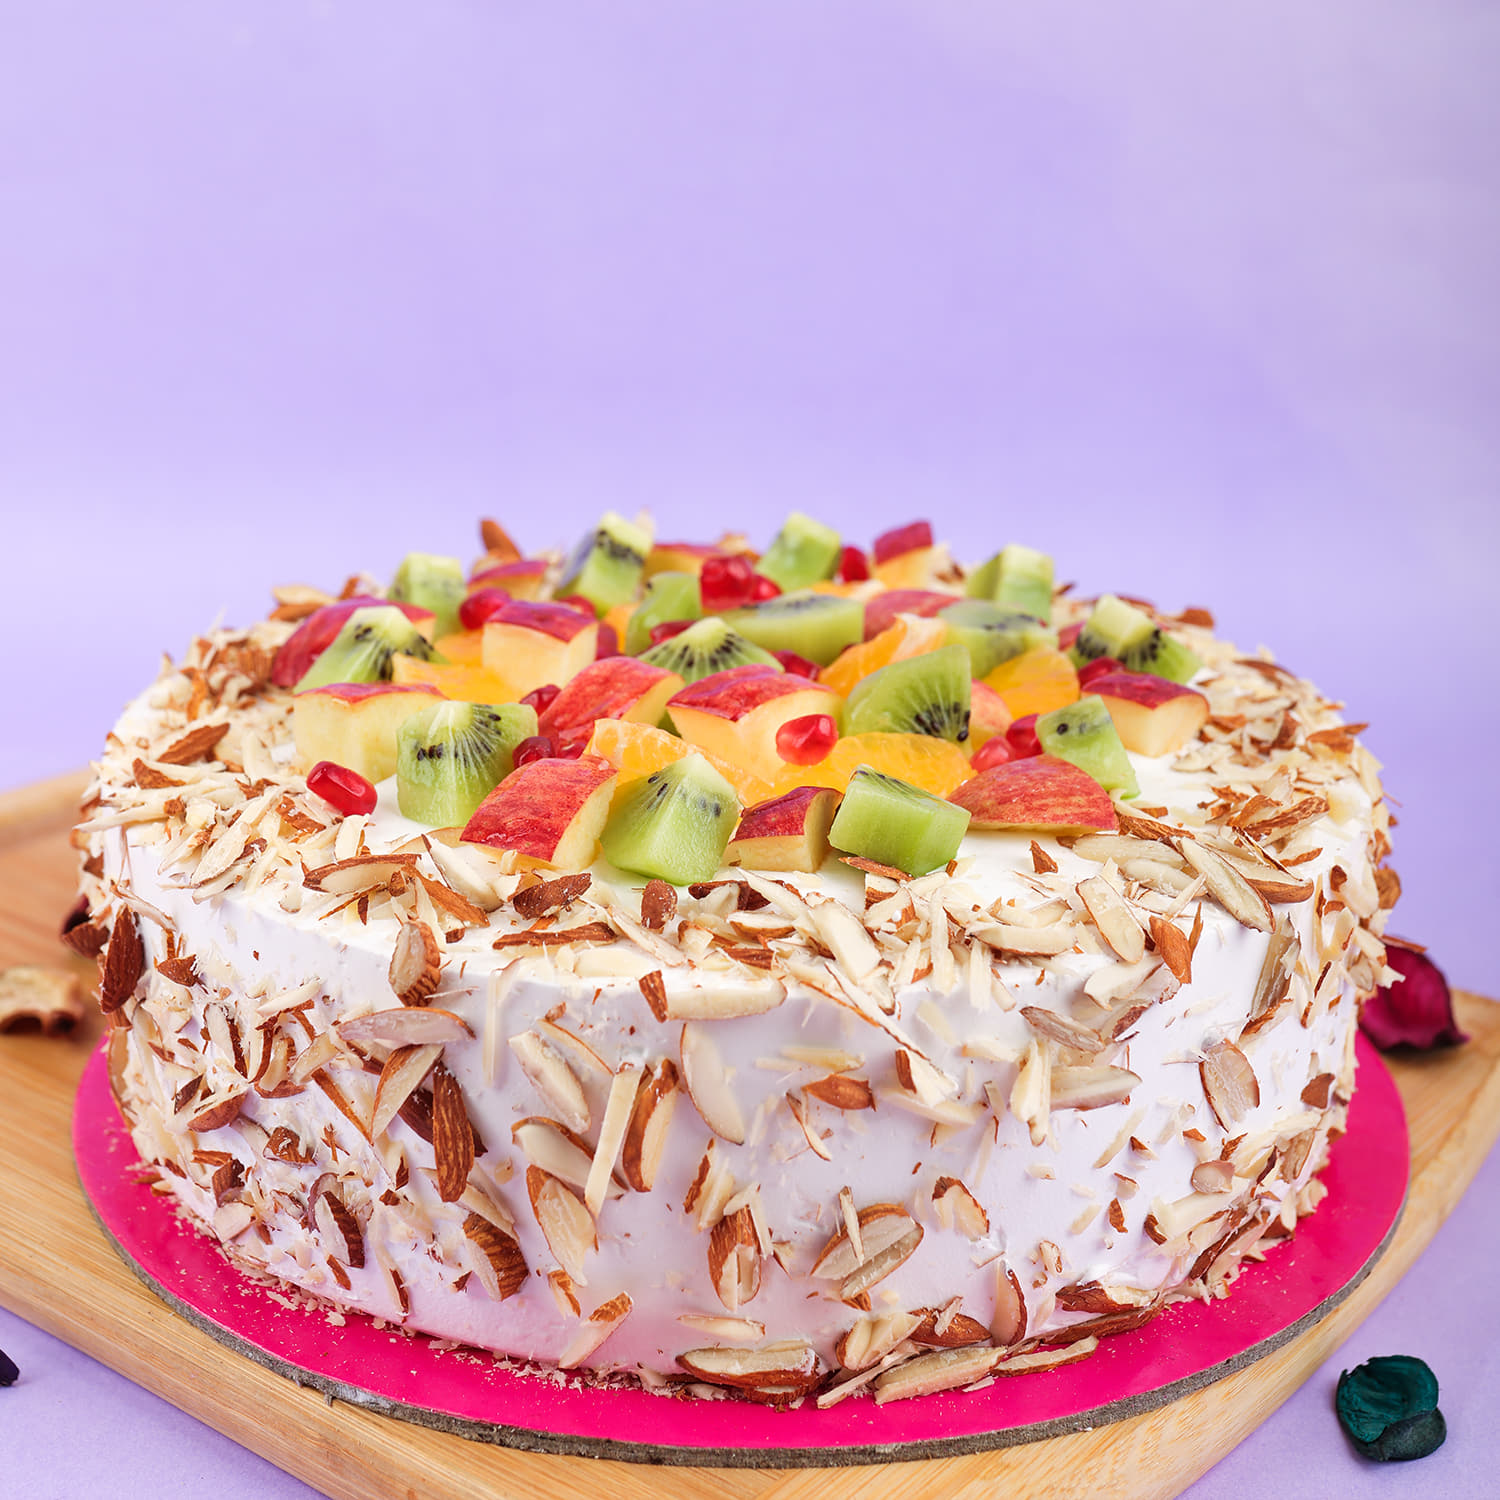 Starbucks India - Our Strawberry & Almond Cake is here to... | Facebook